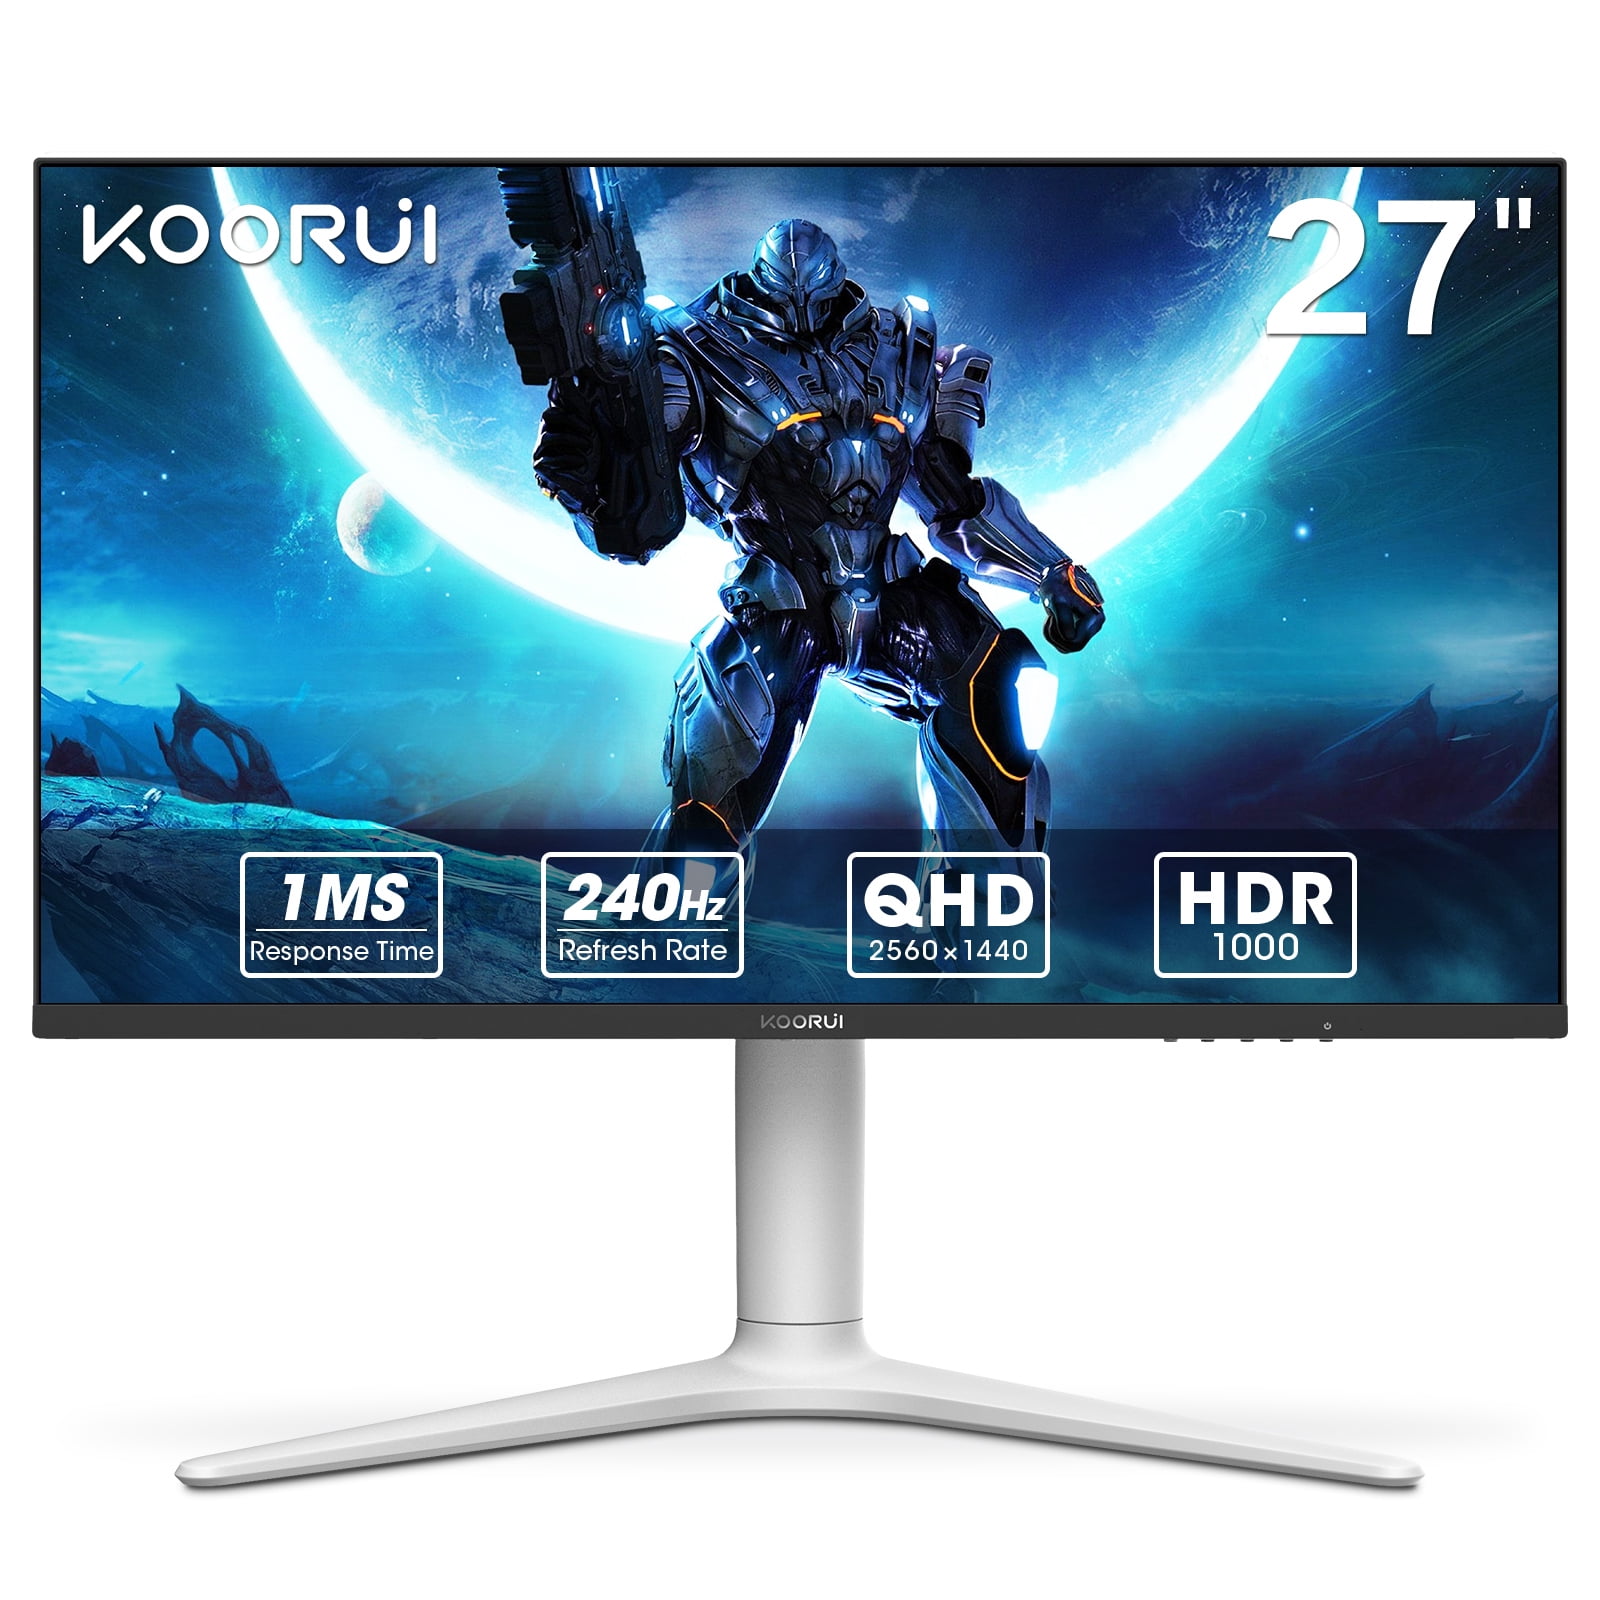 Remember to enter if you wanna win! #winner #gaming #gamers #val #valo, koorui 24 inch monitor